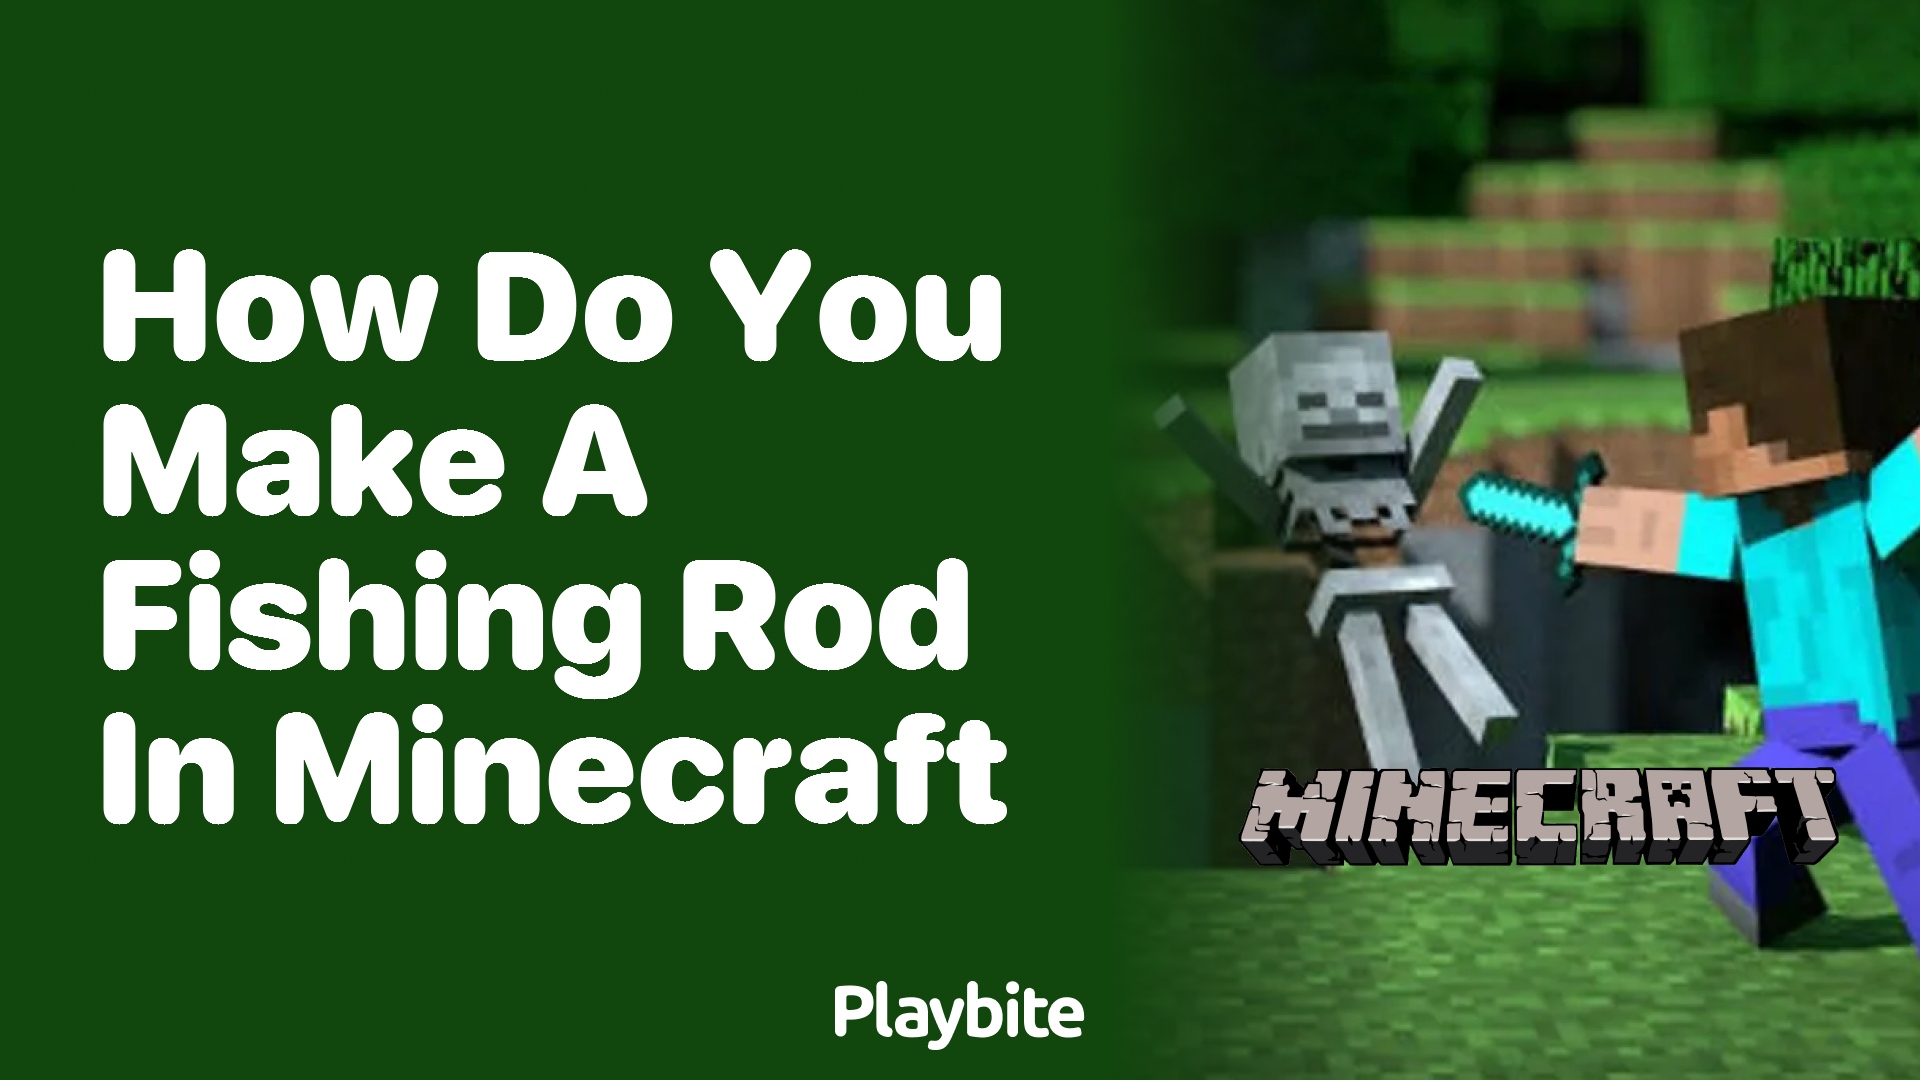 How Do You Make a Fishing Rod in Minecraft? - Playbite